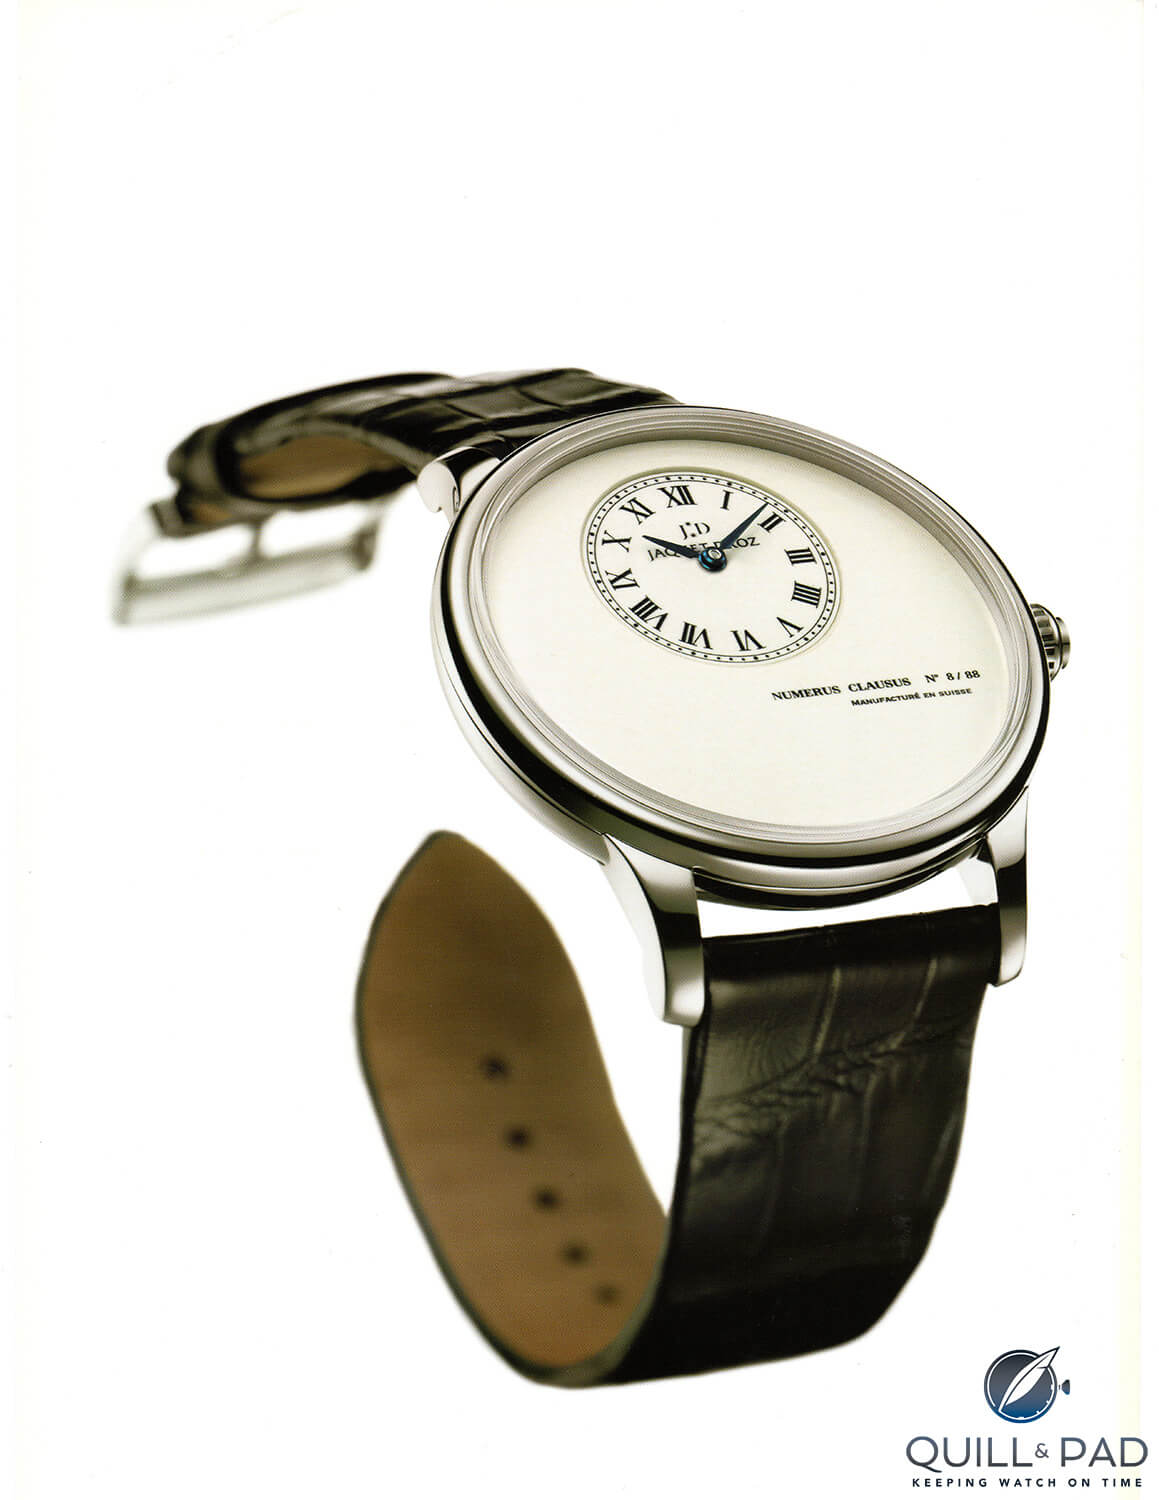 Jaquet Droz’s Petite Heure Minute Email from 2002 in a 43 mm white gold case